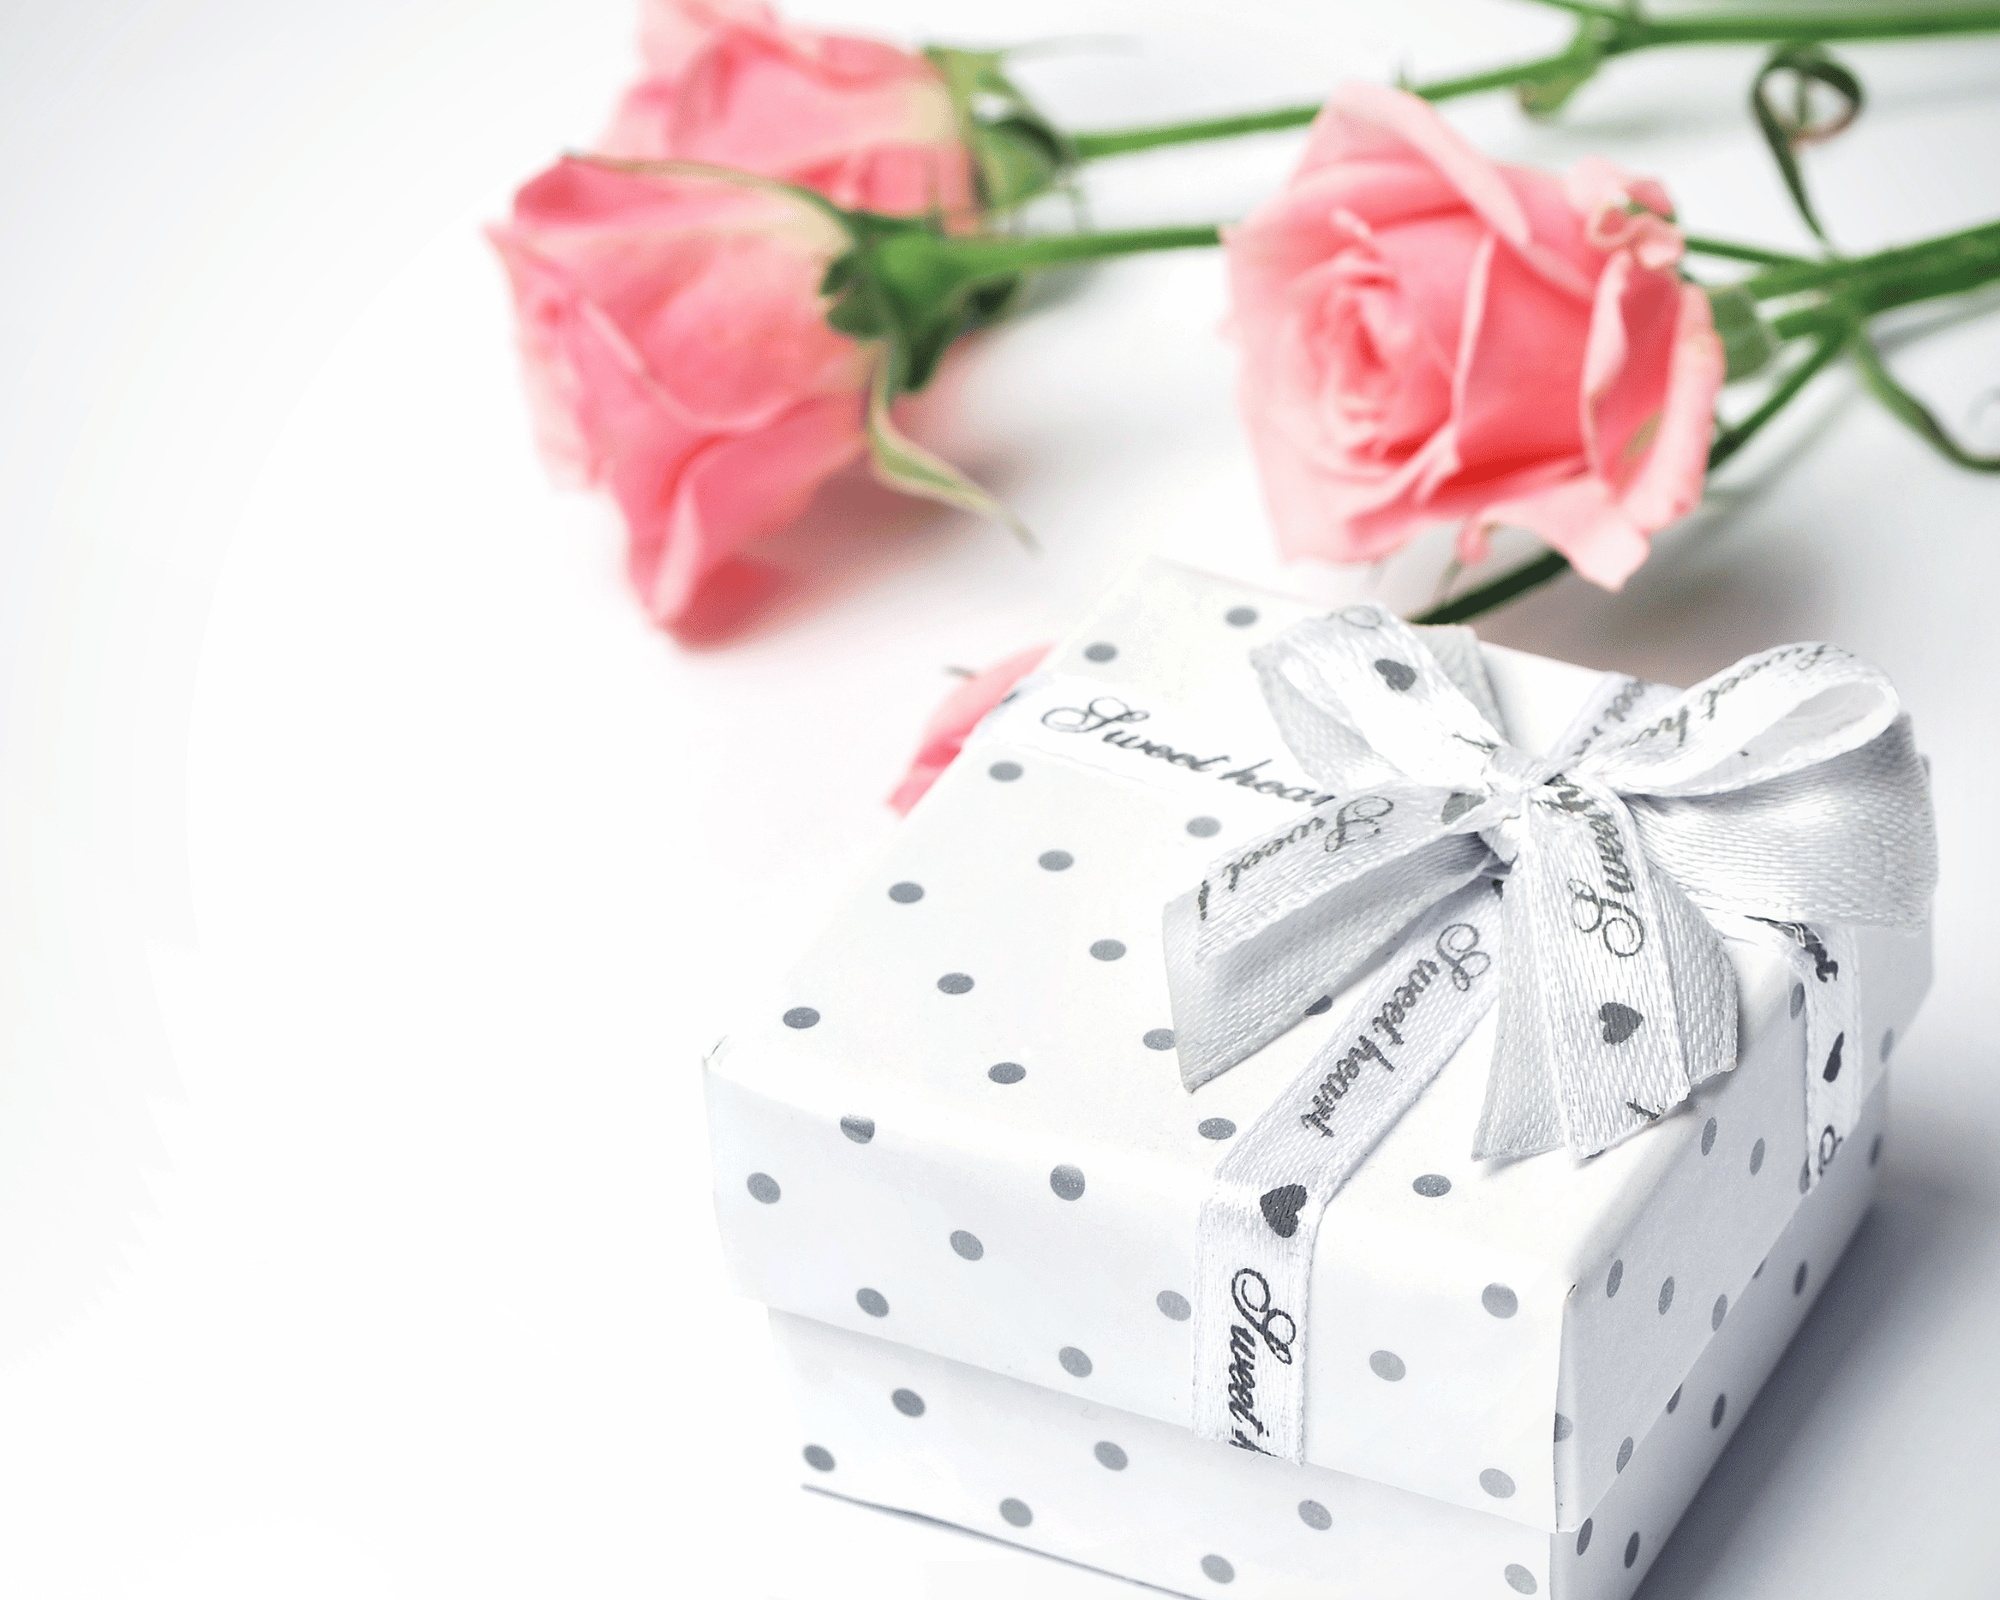 Gifts for Your Partner Before a Holiday: Thoughtful Surprises to Set the Mood